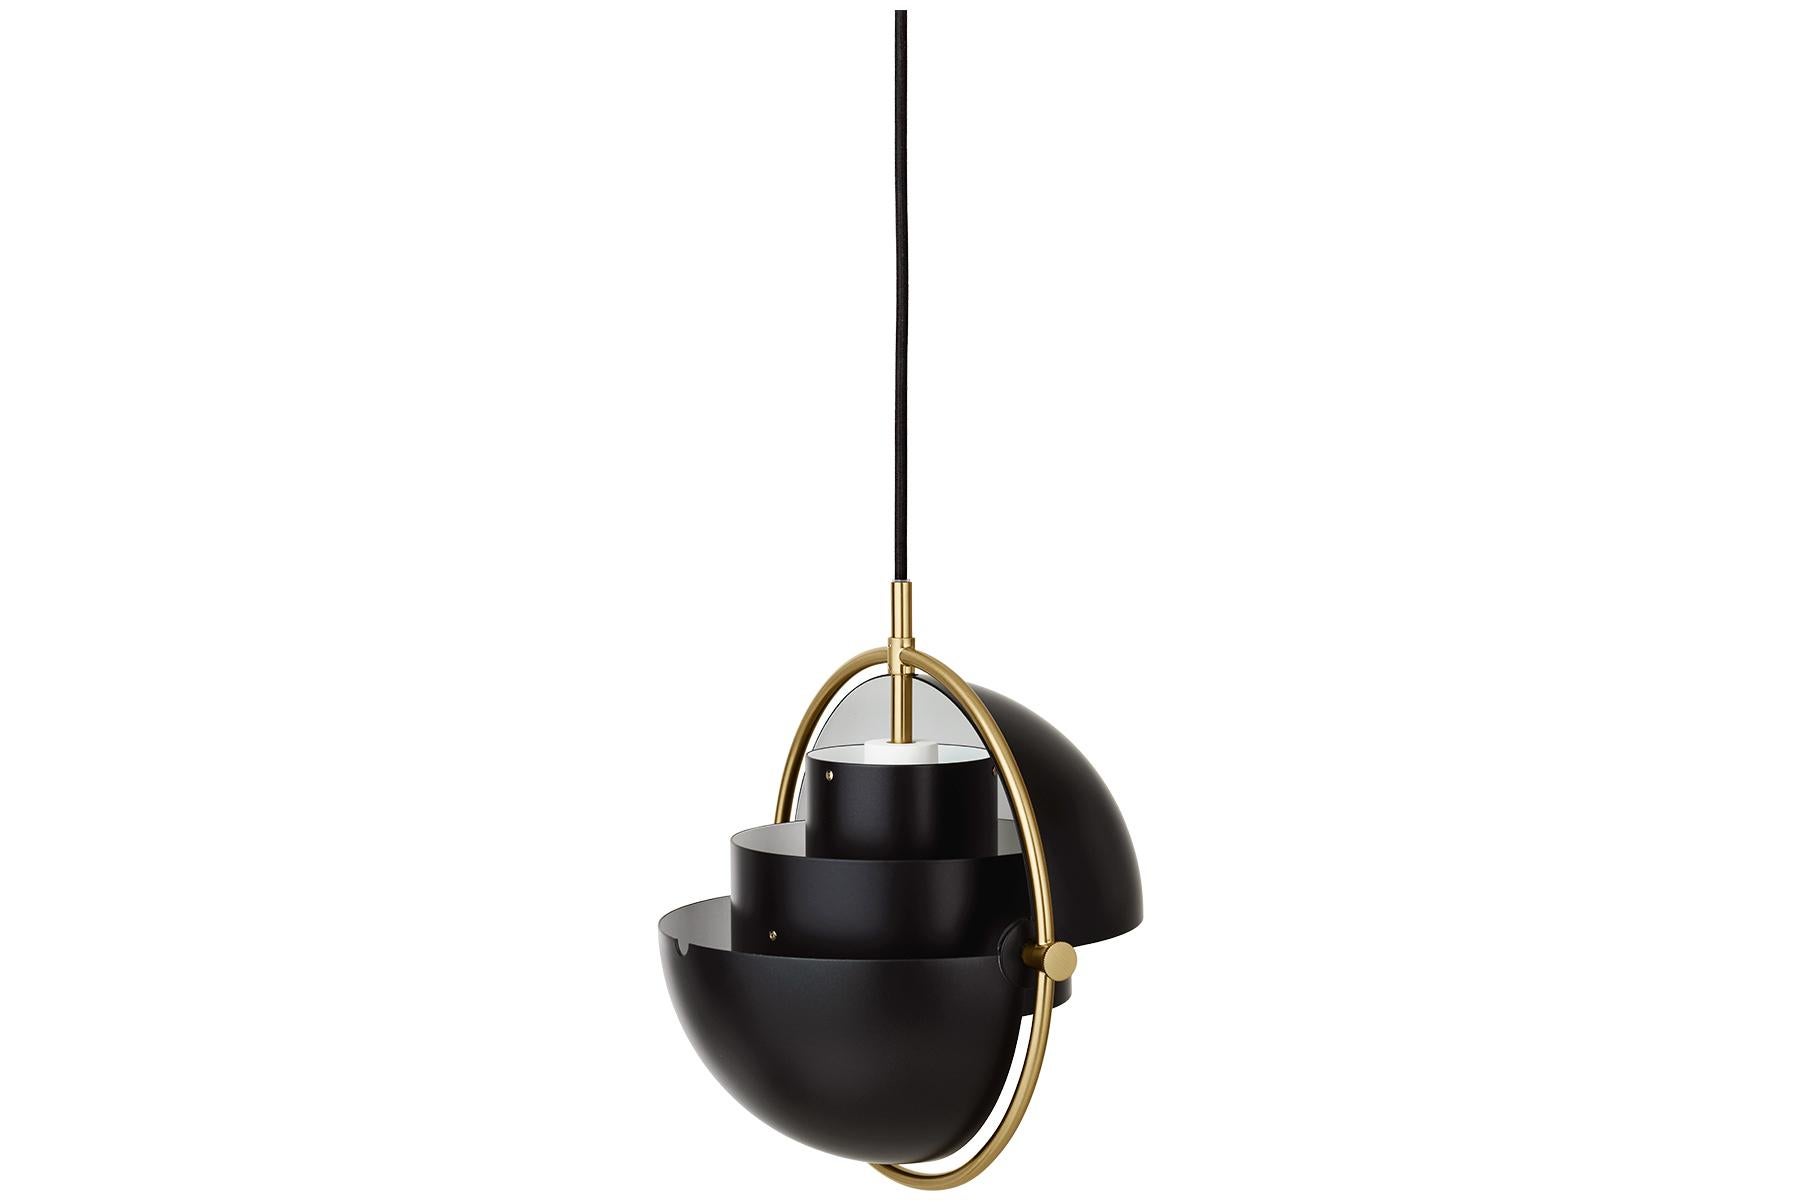 The Multi-Lite Pendant embraces the golden era of Danish design with its characteristic shape of two opposing outside, mobile shades that enable creating a personal installation and a wide range of lighting values in a room.

The Multi-Lite